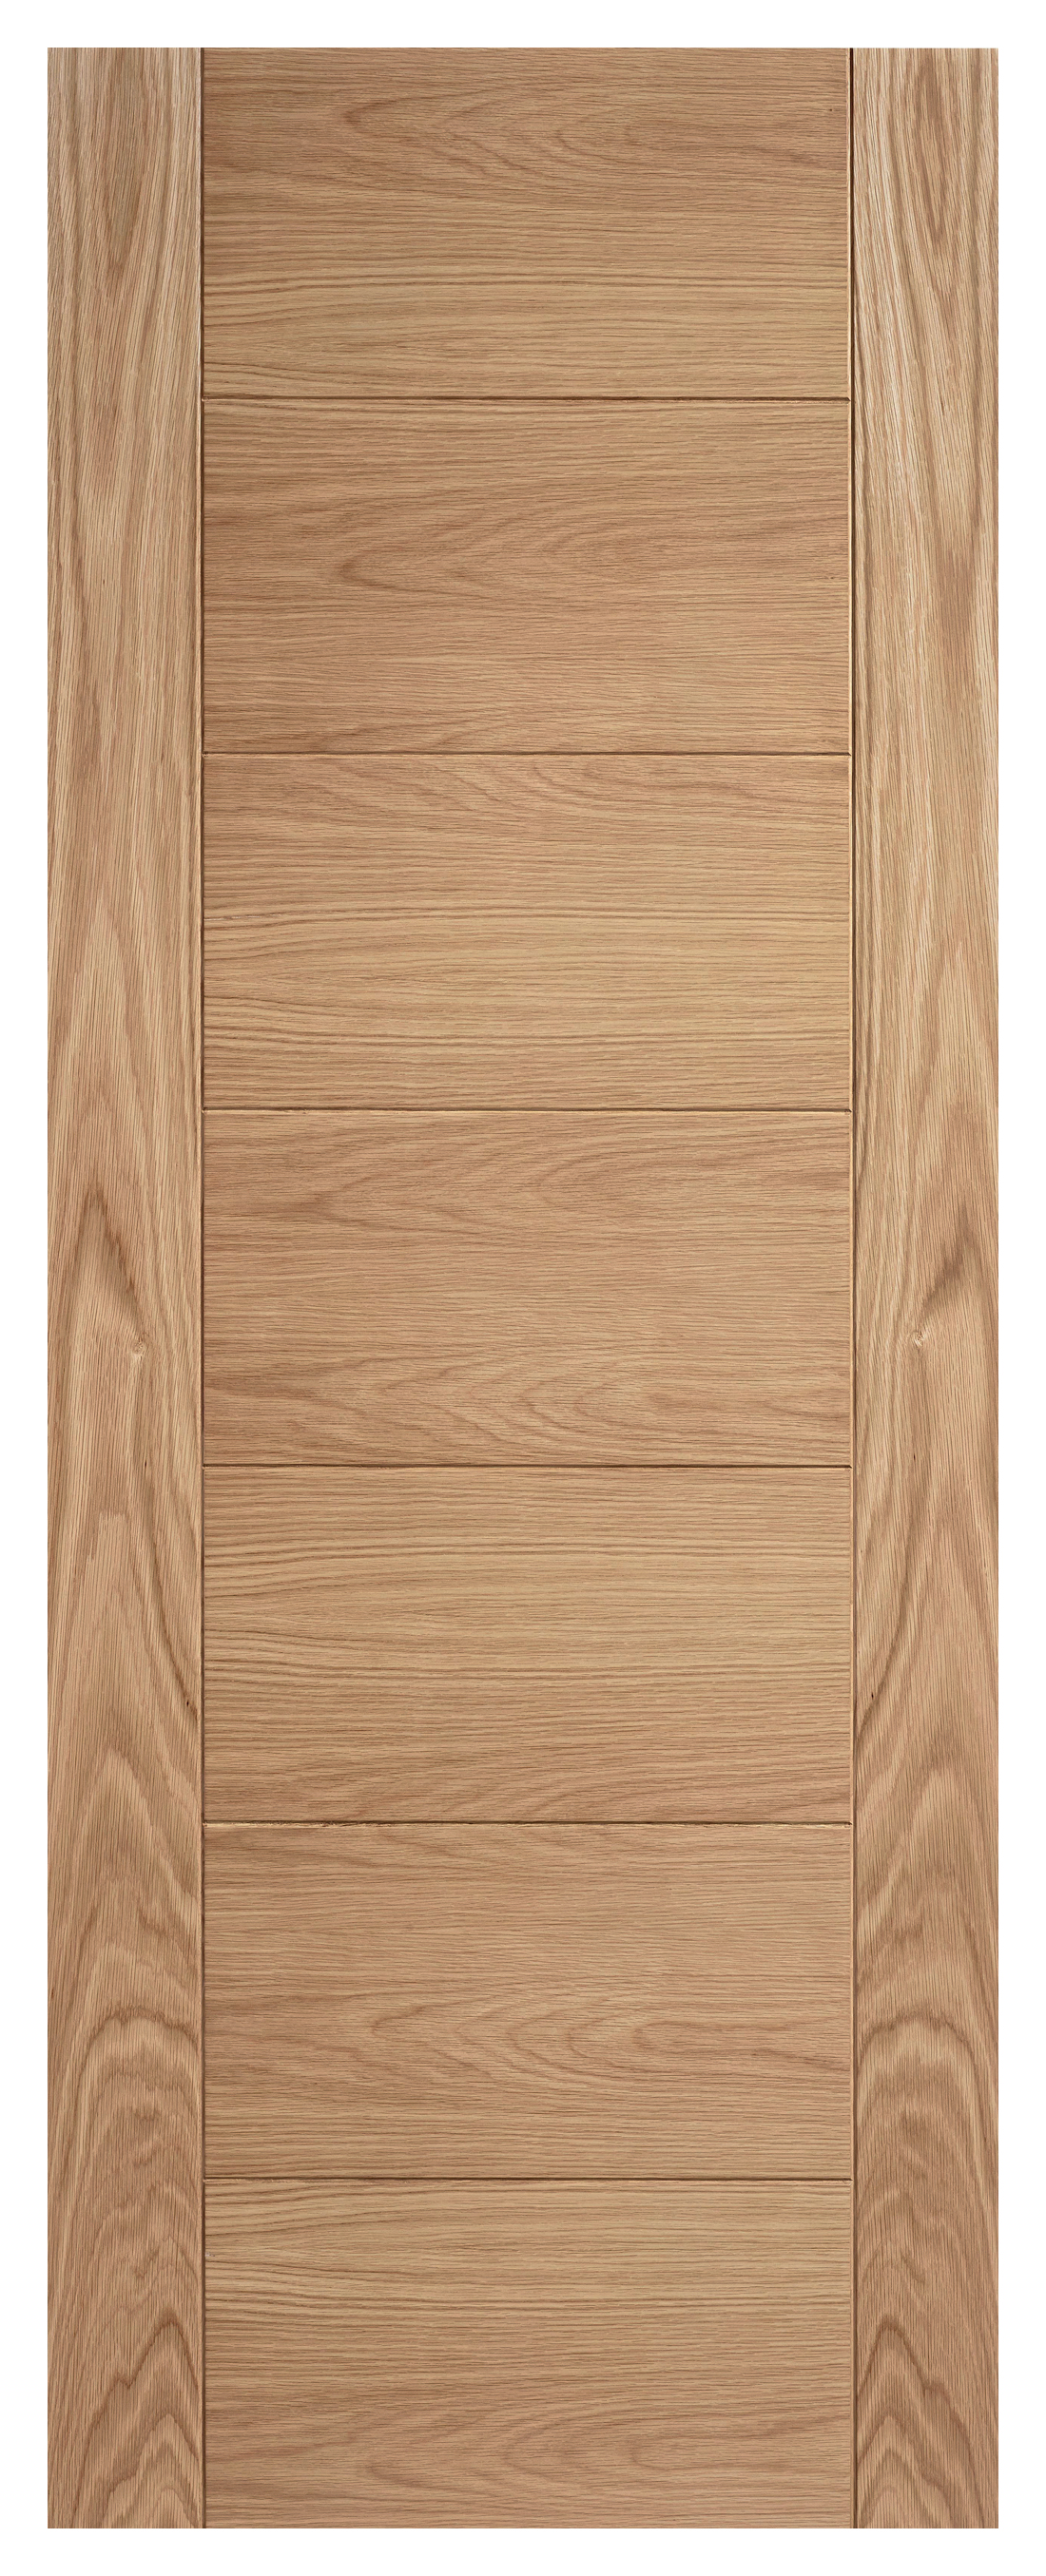 Image of LPD Internal Carini 7 Panel Pre-Finished Oak Solid Core Door - 610 x 1981mm